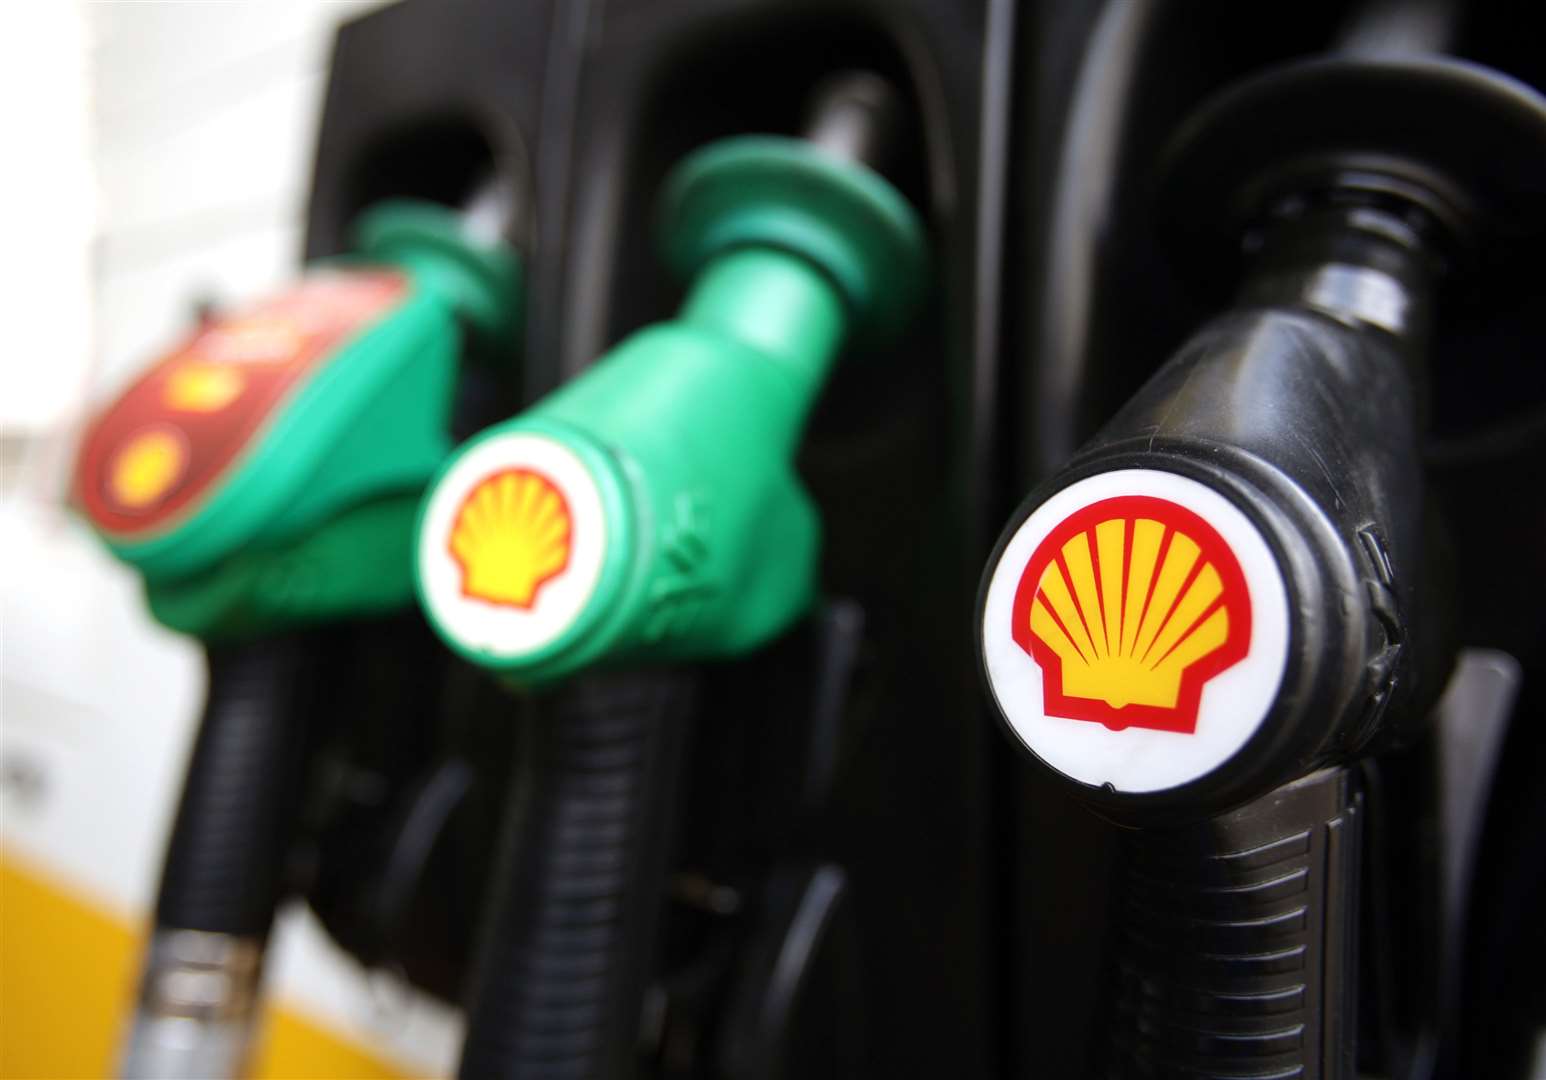 Energy giant Shell was among the UK firms to face environmental activism campaigns led by investors this year (Yui Mok/PA)